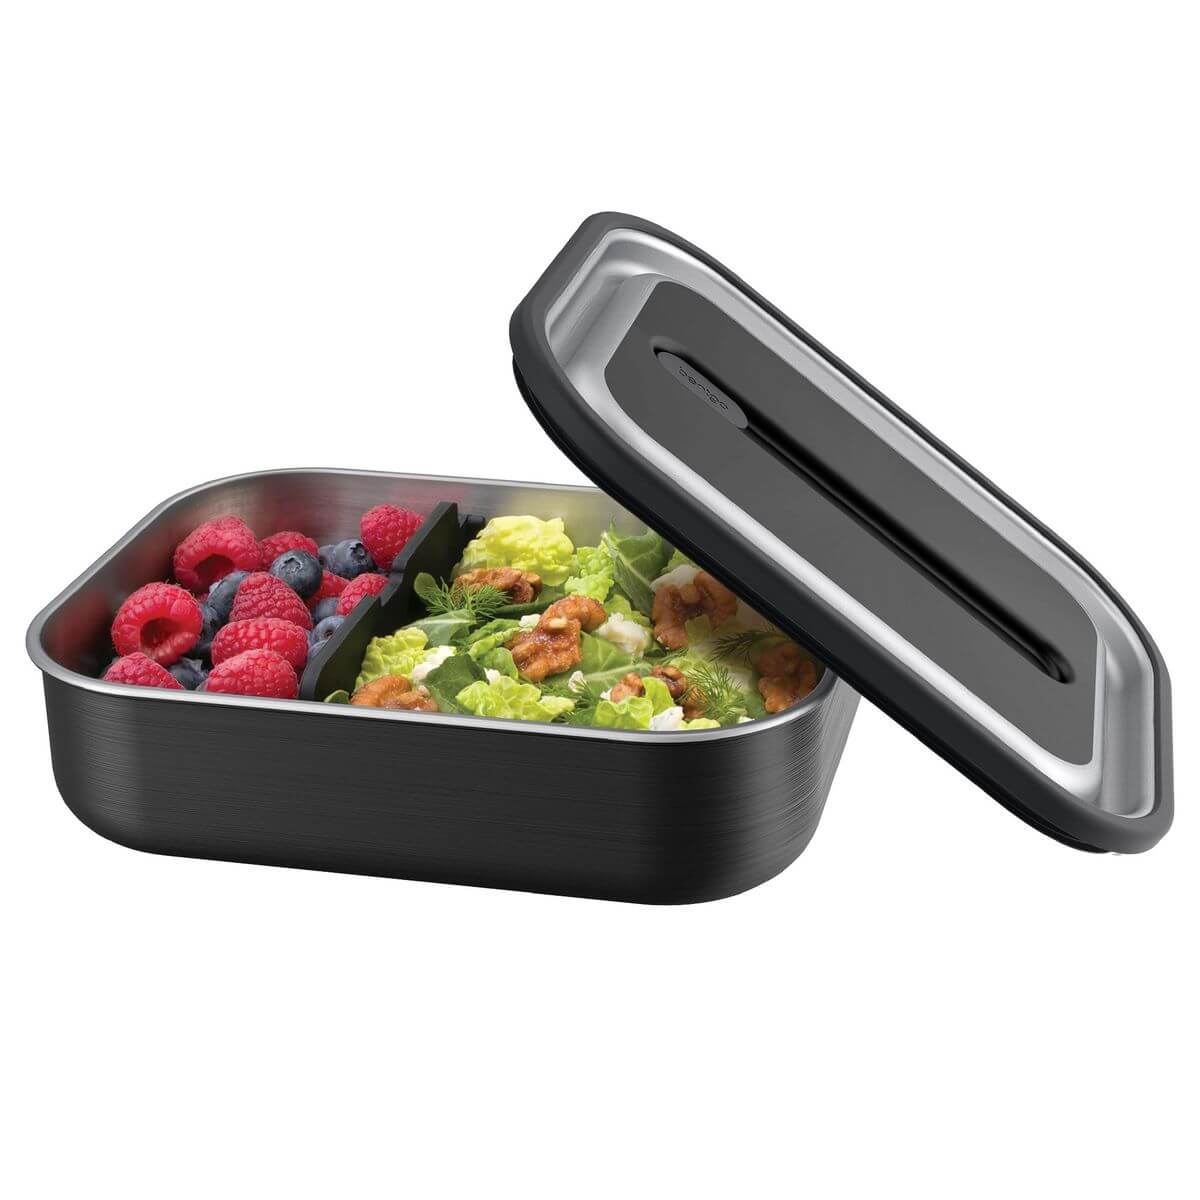 A Carbon Black stainless steel bento lunch box with fruit and lunch salad inside